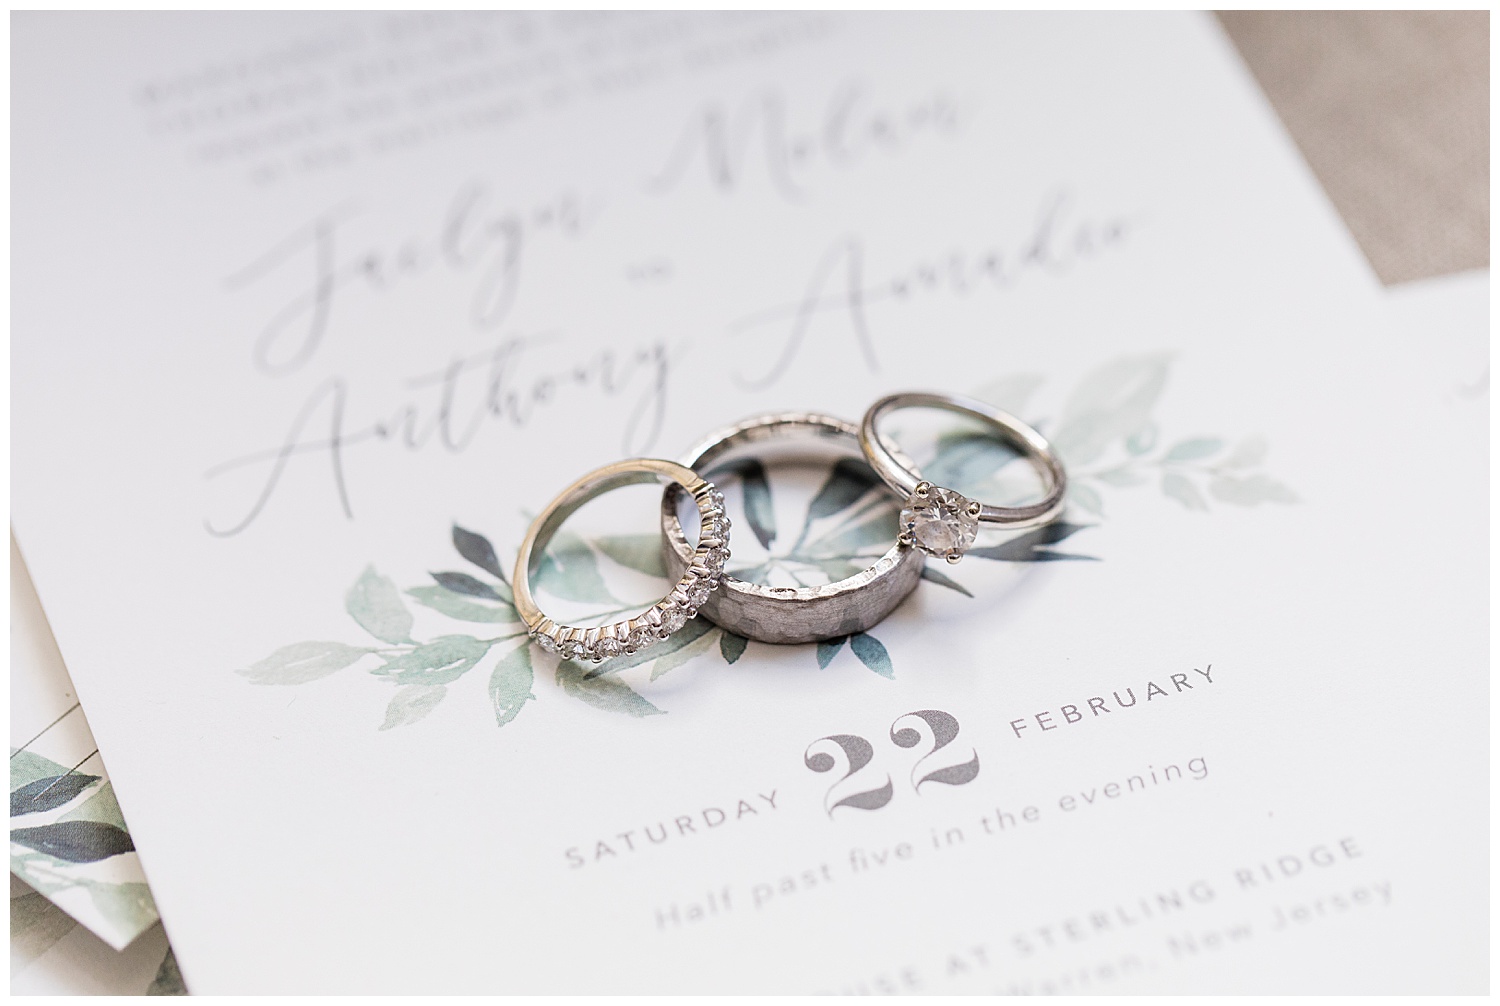 Bride and groom rings stacked on white wedding invitation with greenery